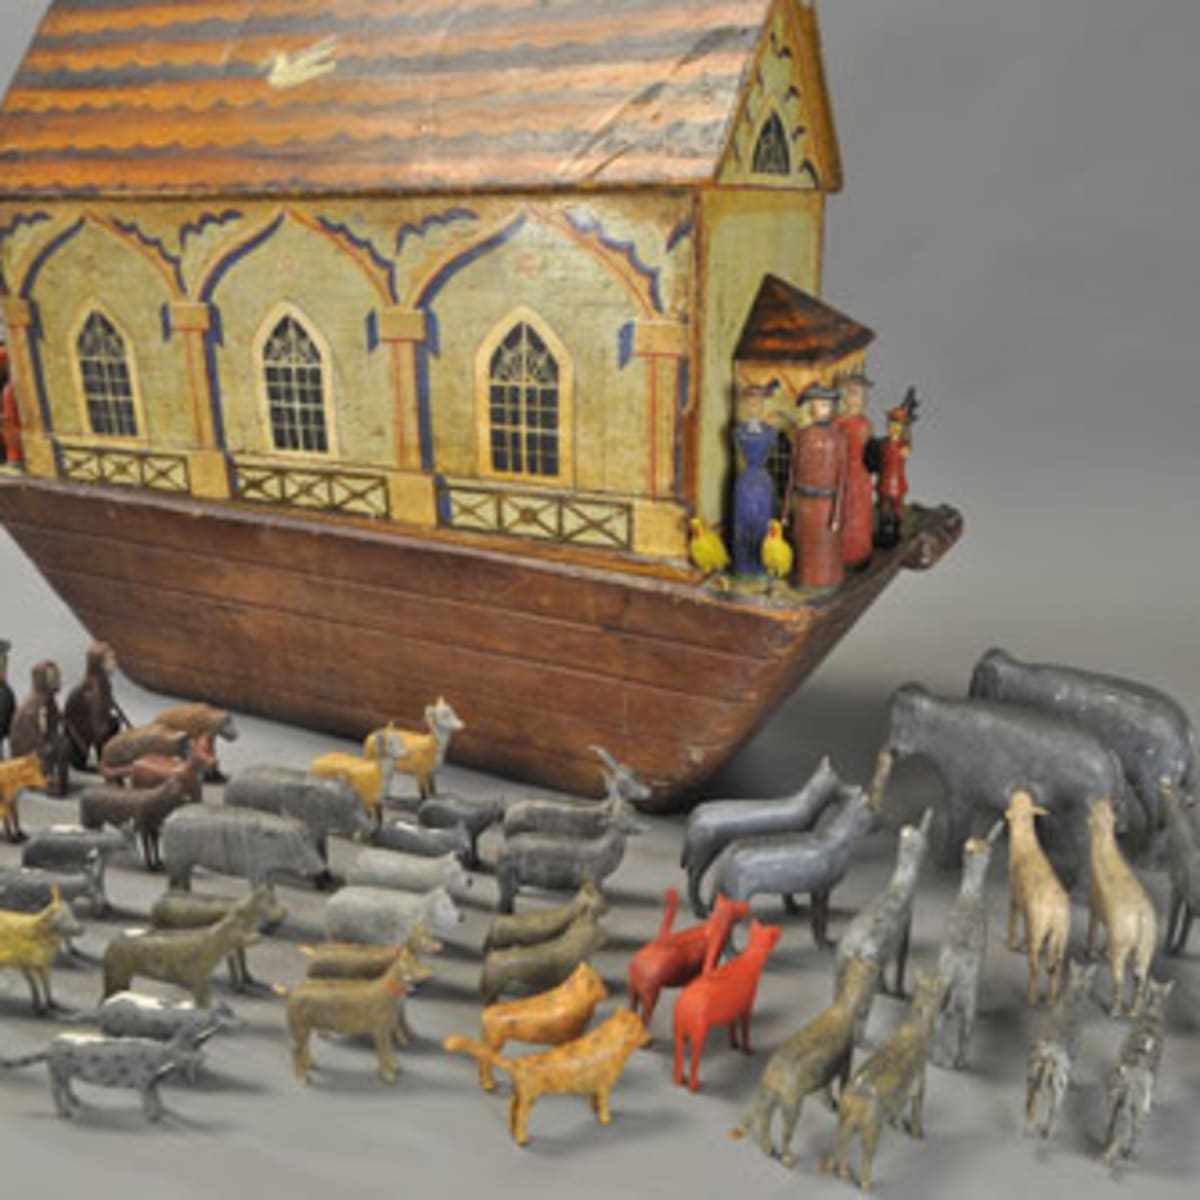 Noah's Ark toy may sail away with $14,000 - Antique Trader